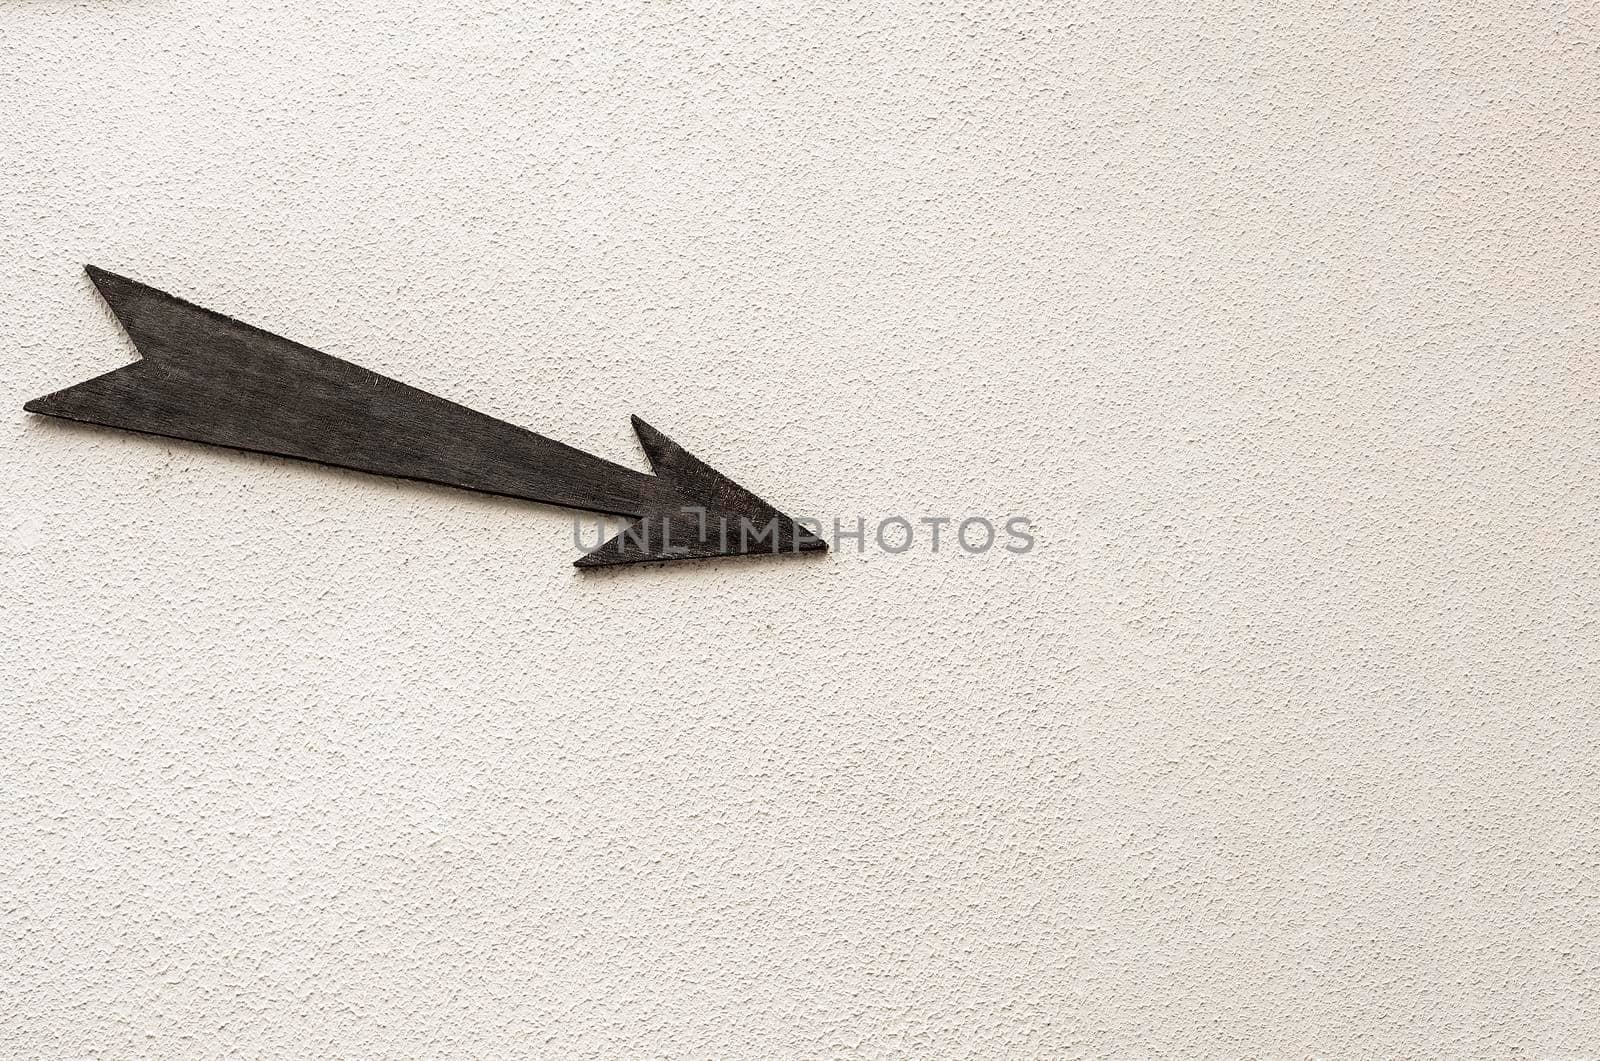 Wooden arrow pointer to the right down on light background. Copy space